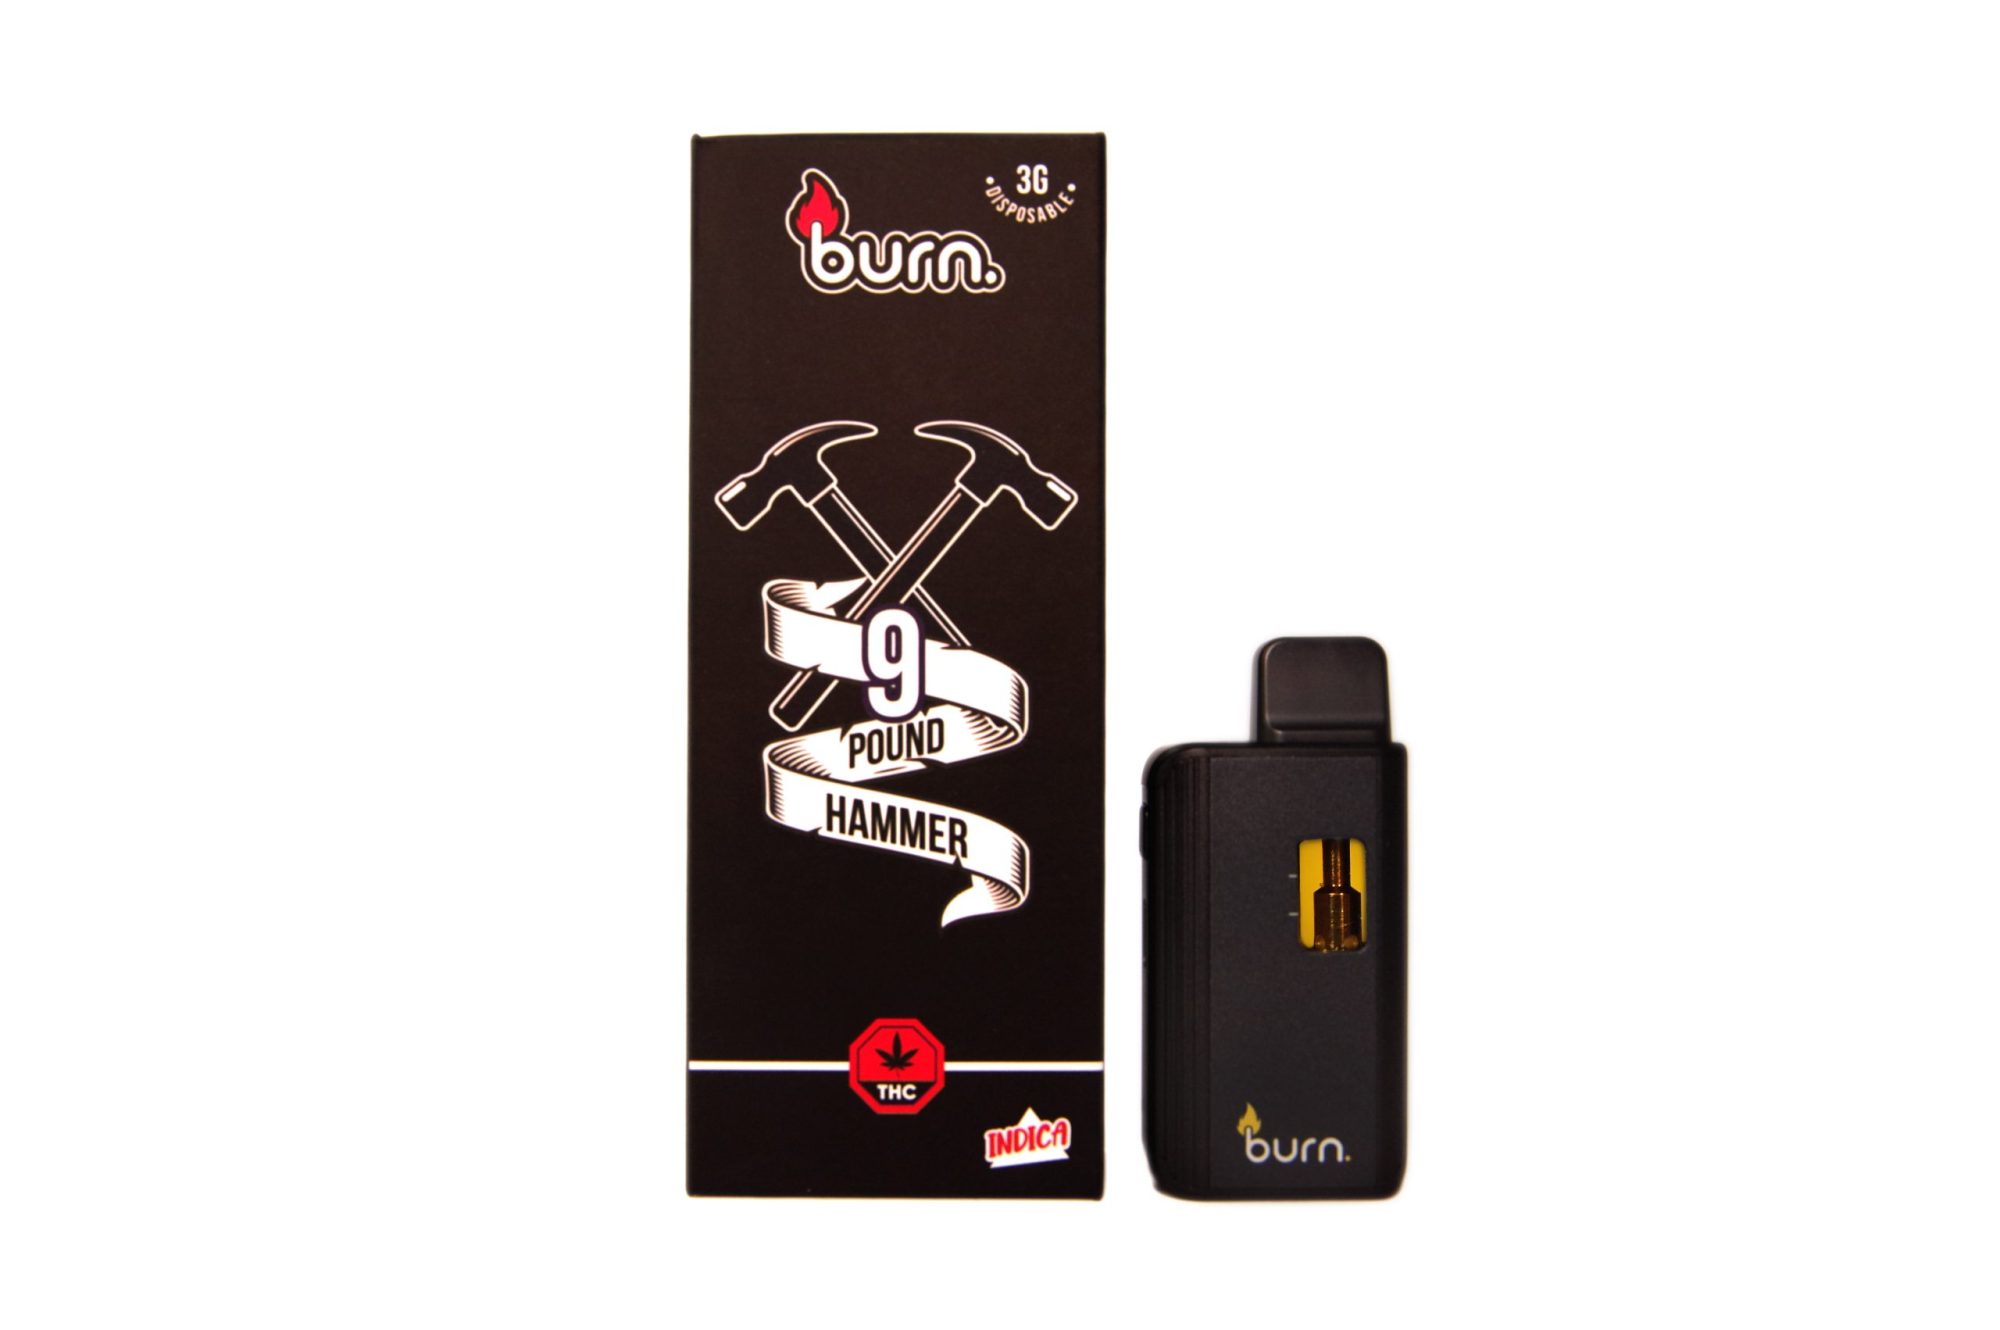 Buy Burn Extracts - 9 Pound Hammer 3ML Mega Sized at Wccannabis Online Shop